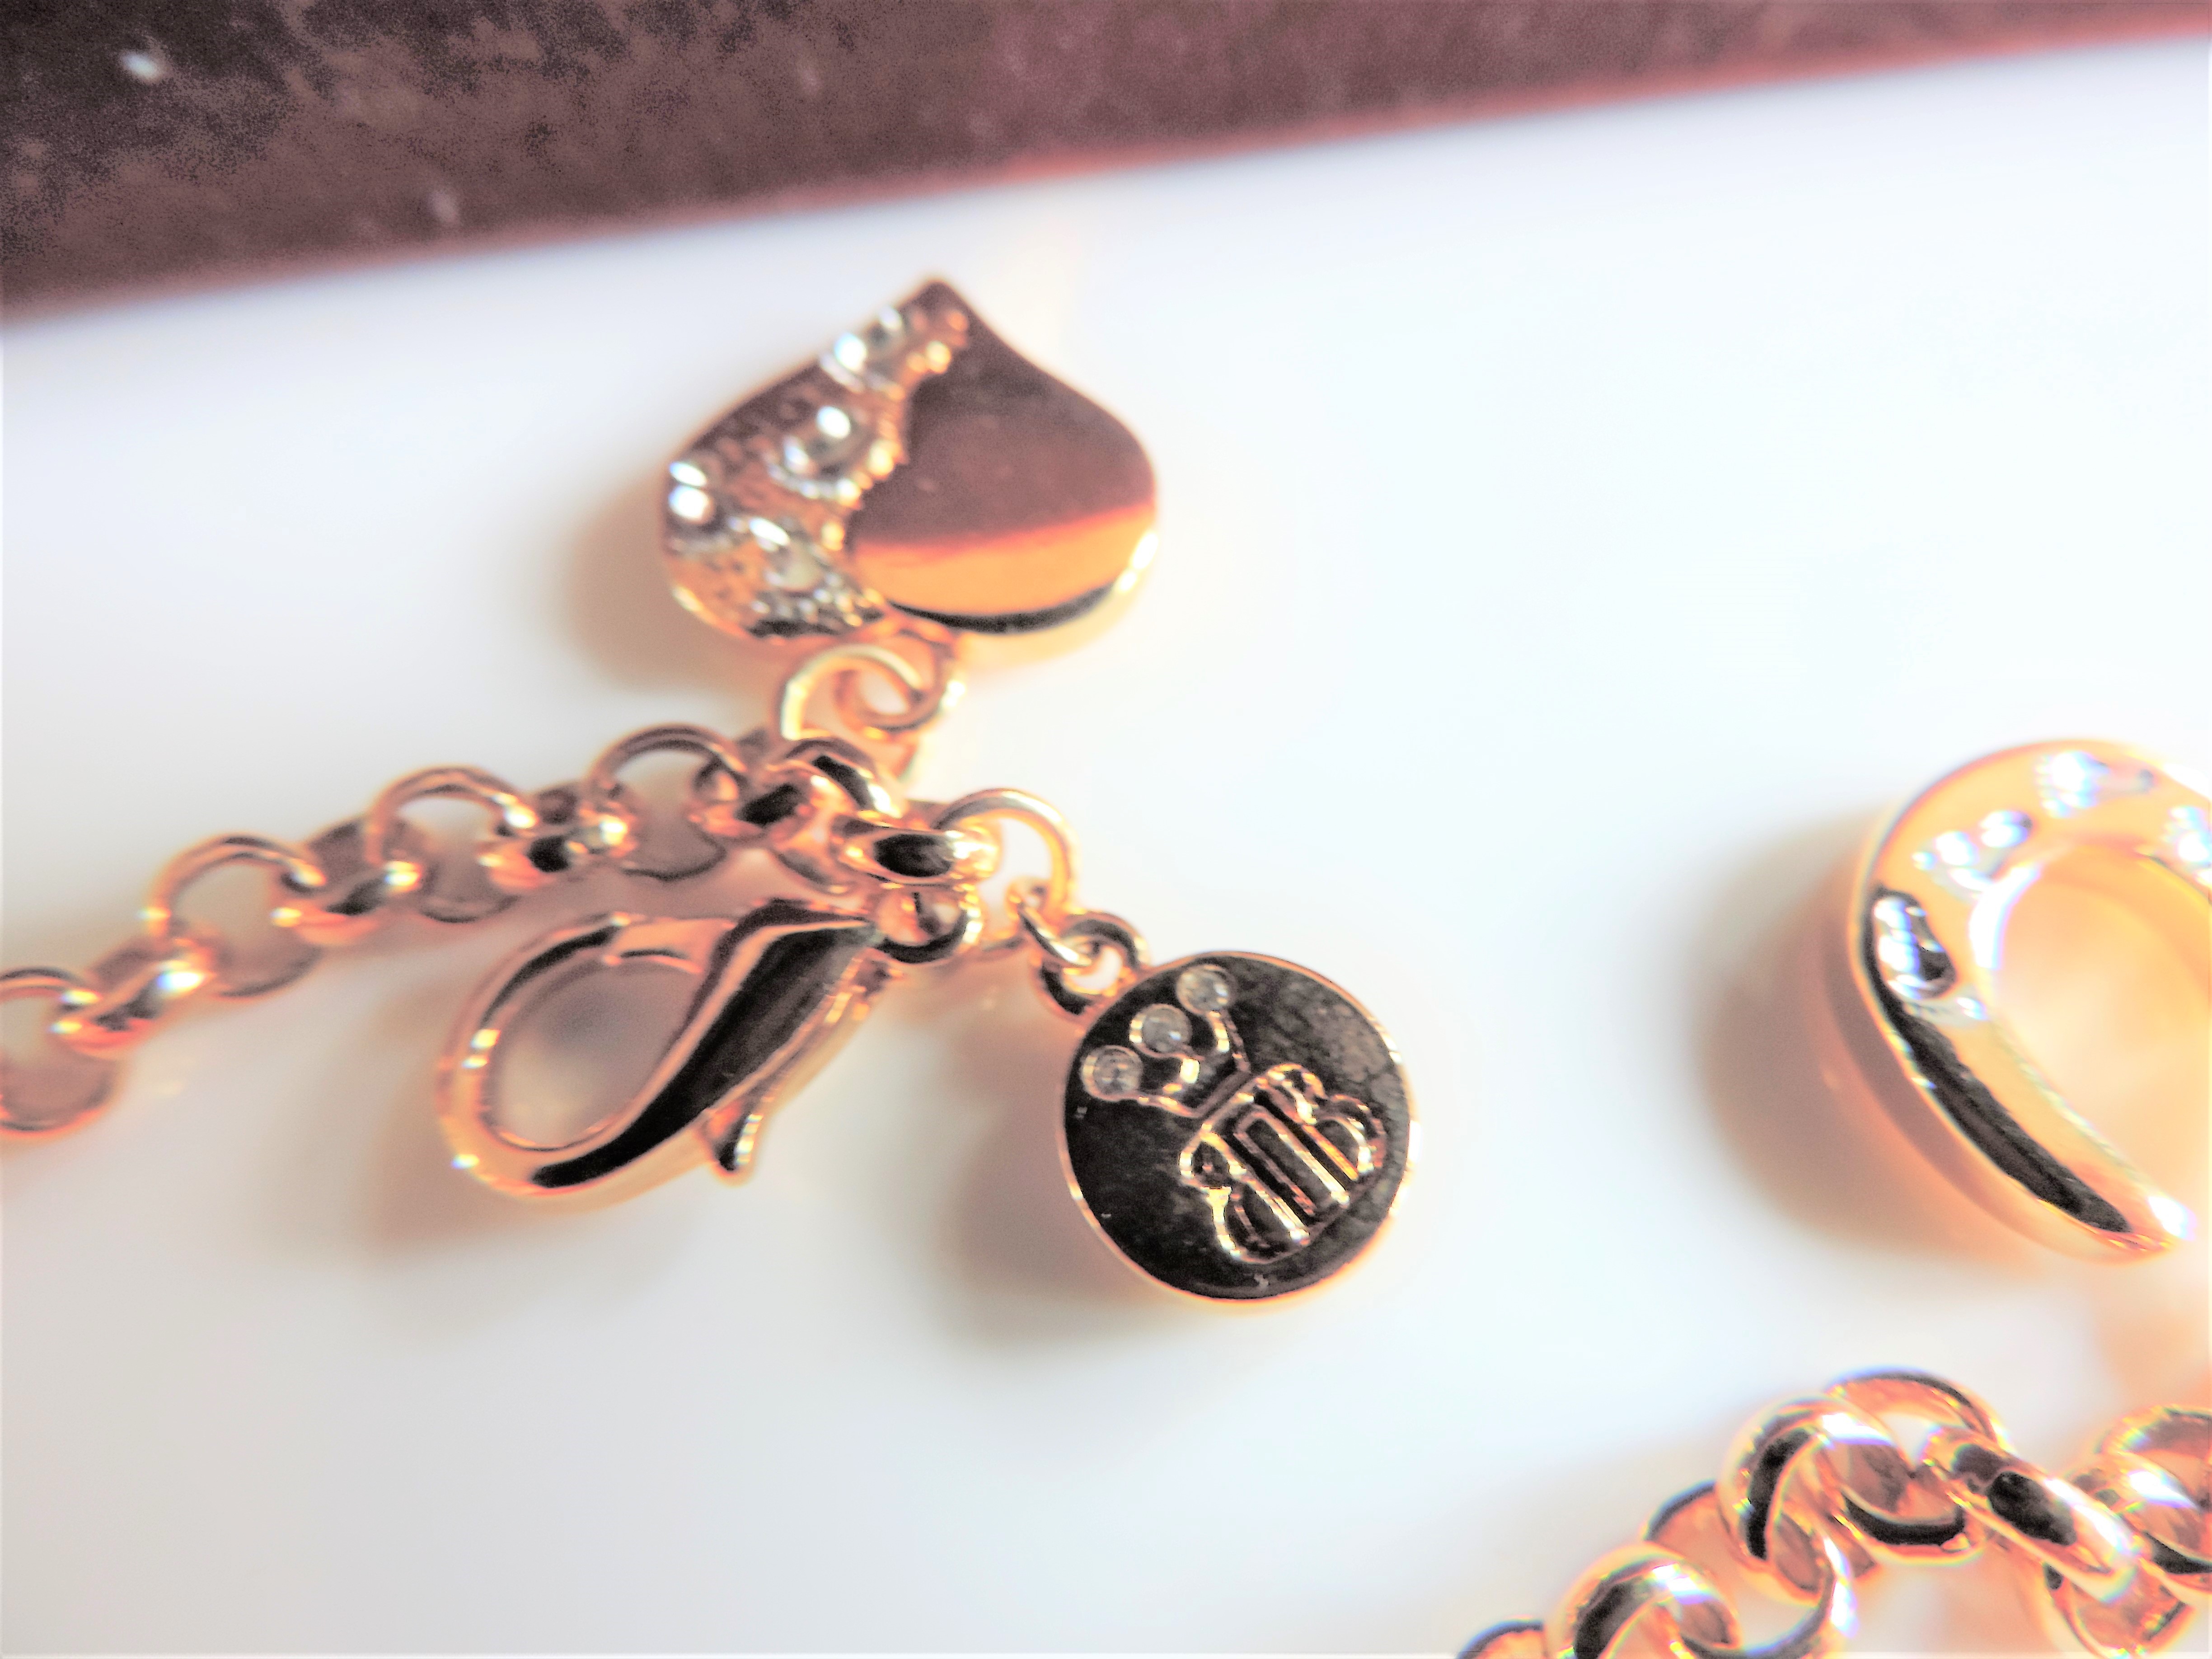 Brooks and Bentley Footprints in the Sand Gold Plate Charm Bracelet - Image 5 of 5